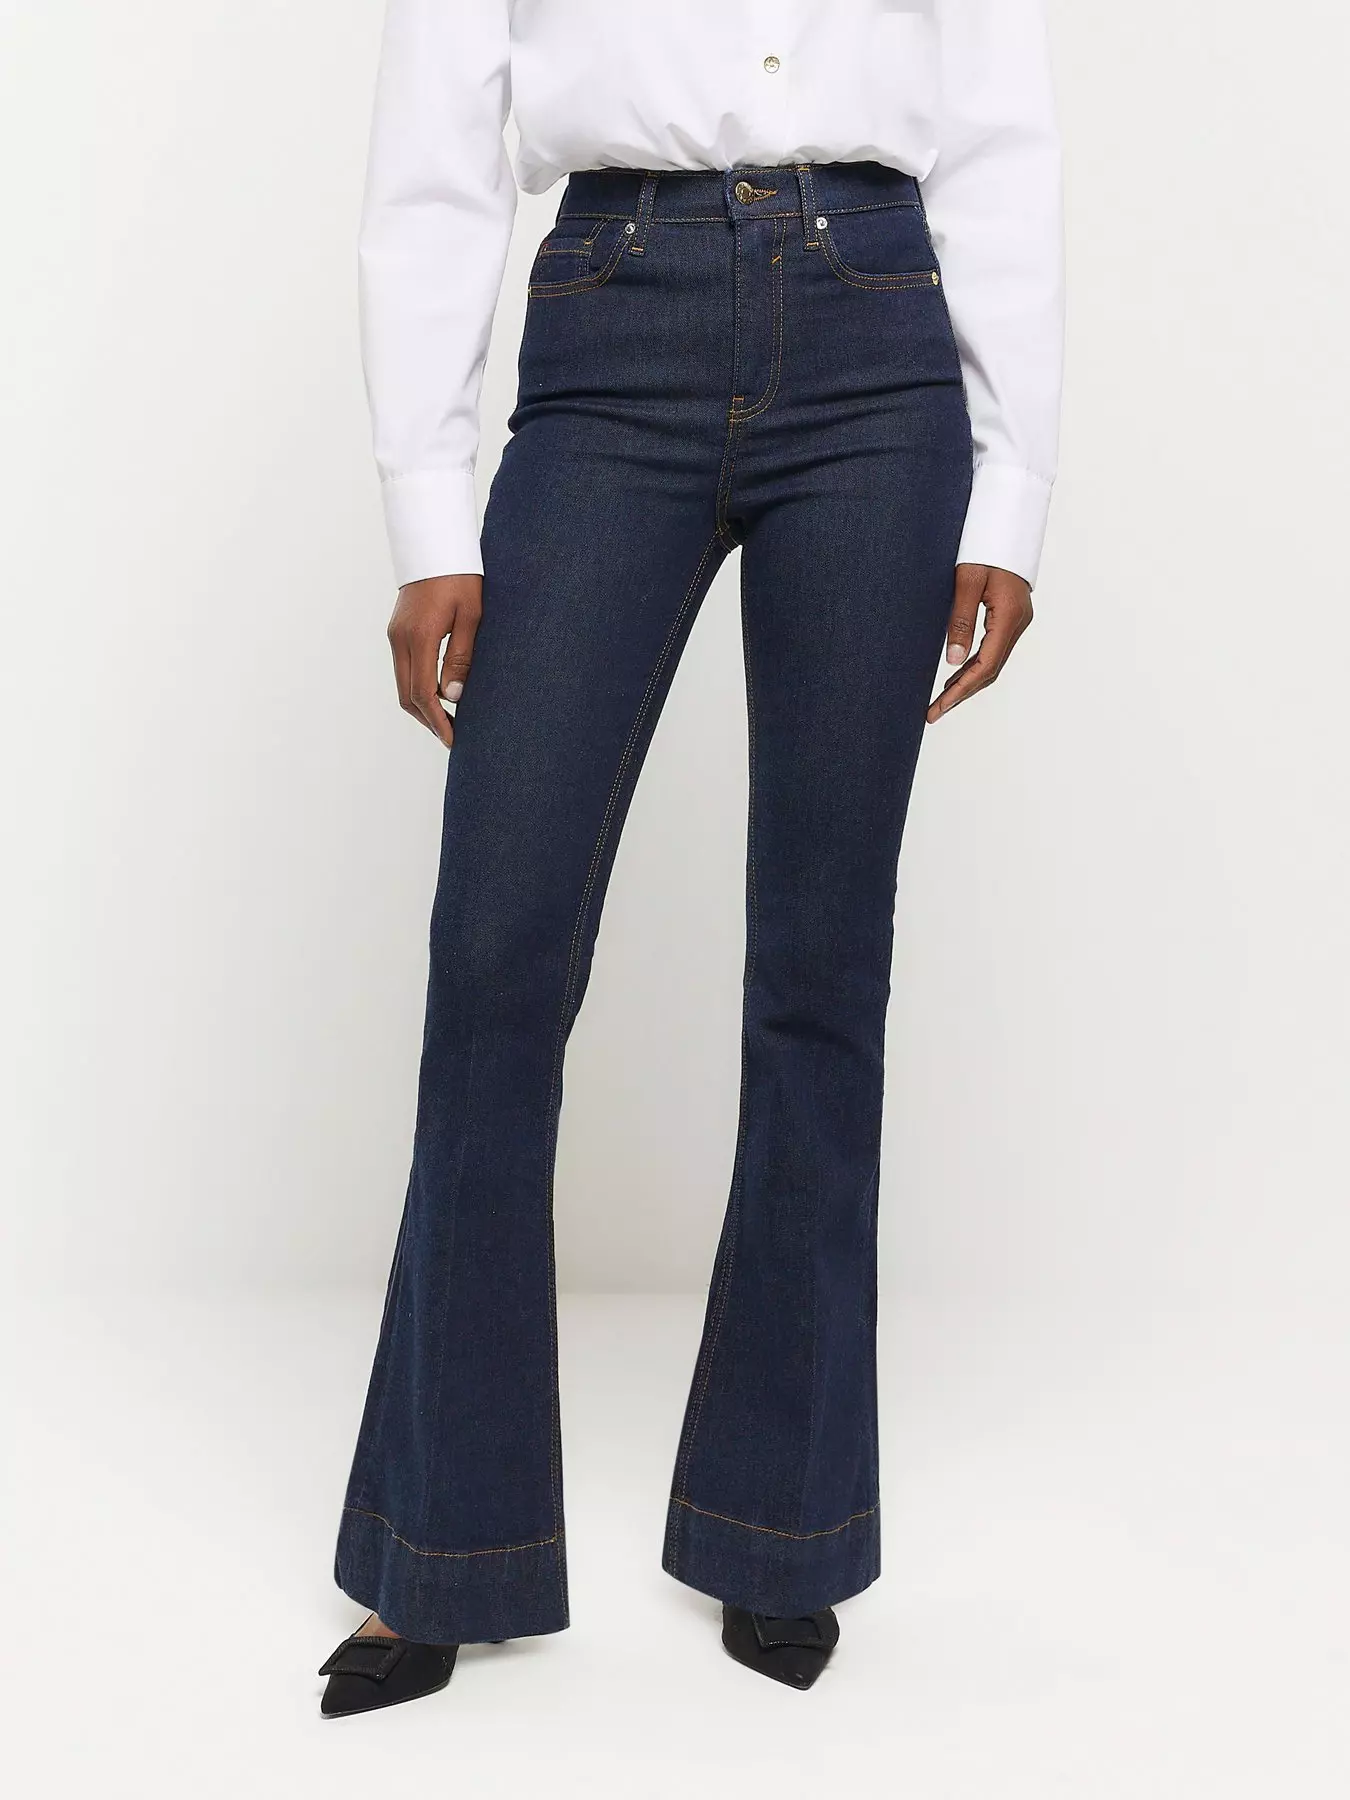 All Of You Tan Flare Jeans FINAL SALE